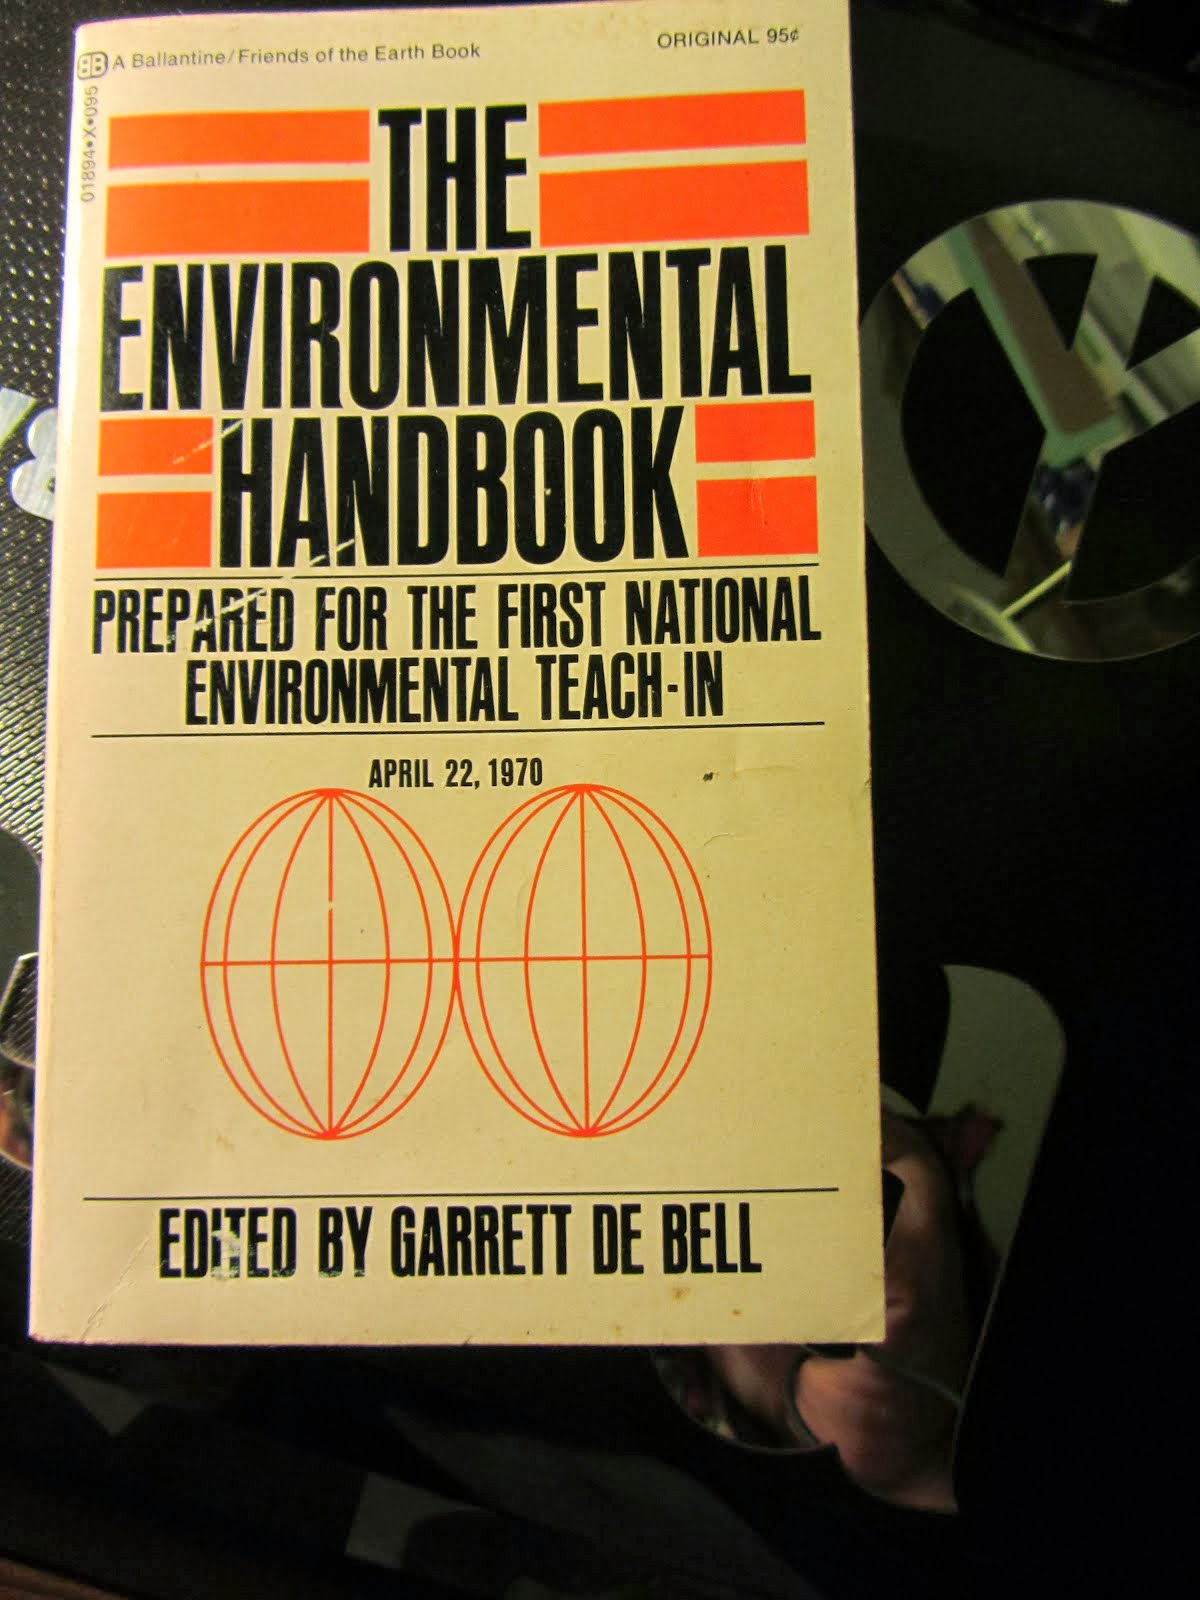 The first Earth Day Handbook